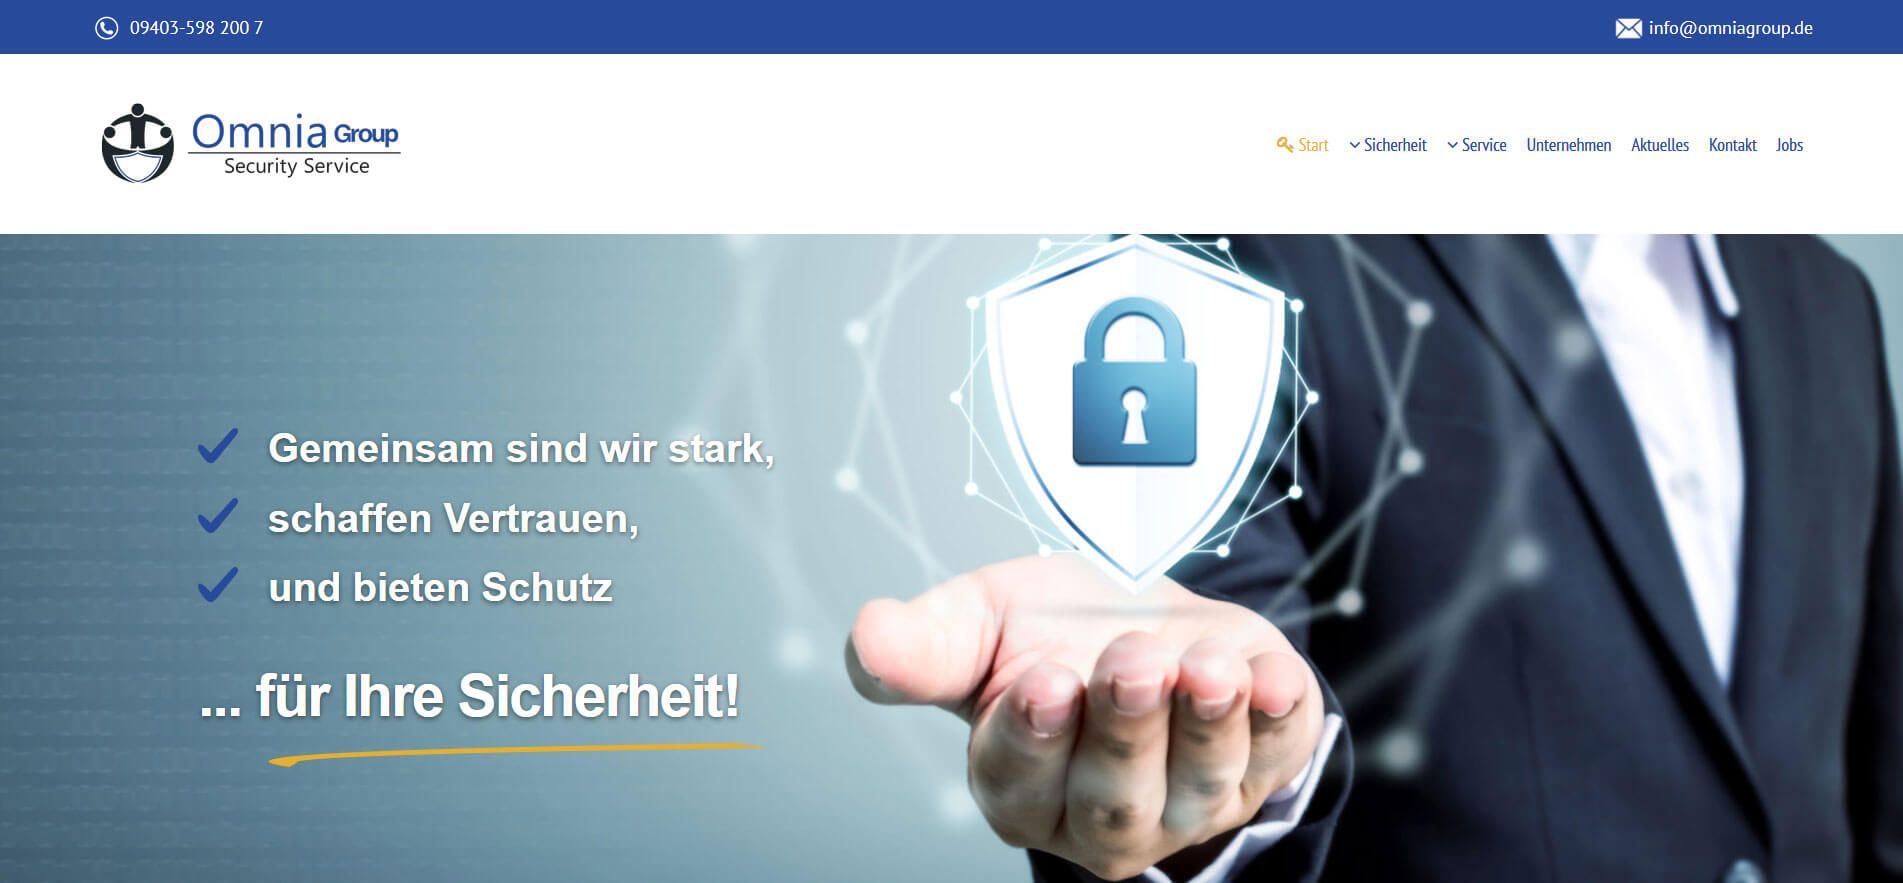 Omniagroup, Security GmbH